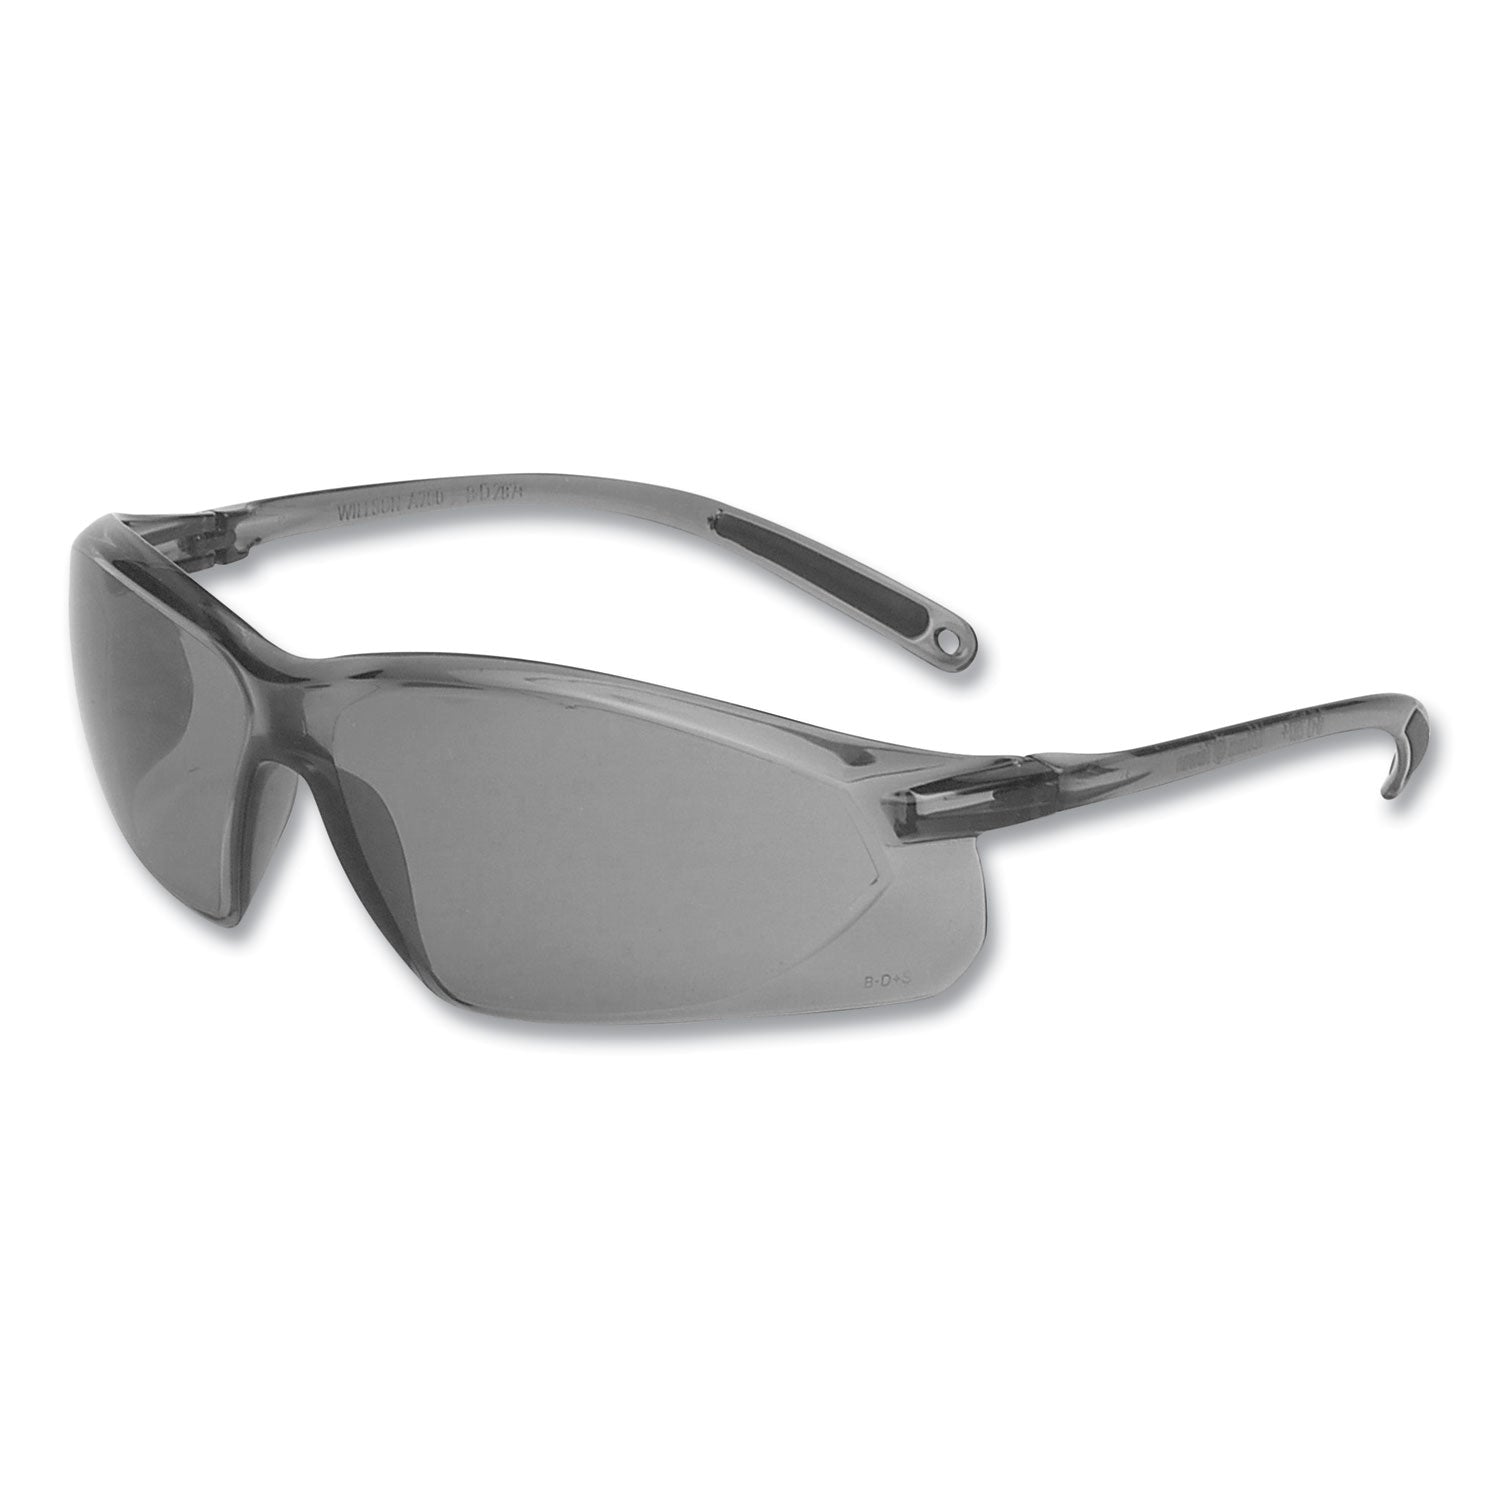 a700-series-protective-eyewear-scratch-resistant-gray-frame-tsr-gray-lens_nspa701 - 1